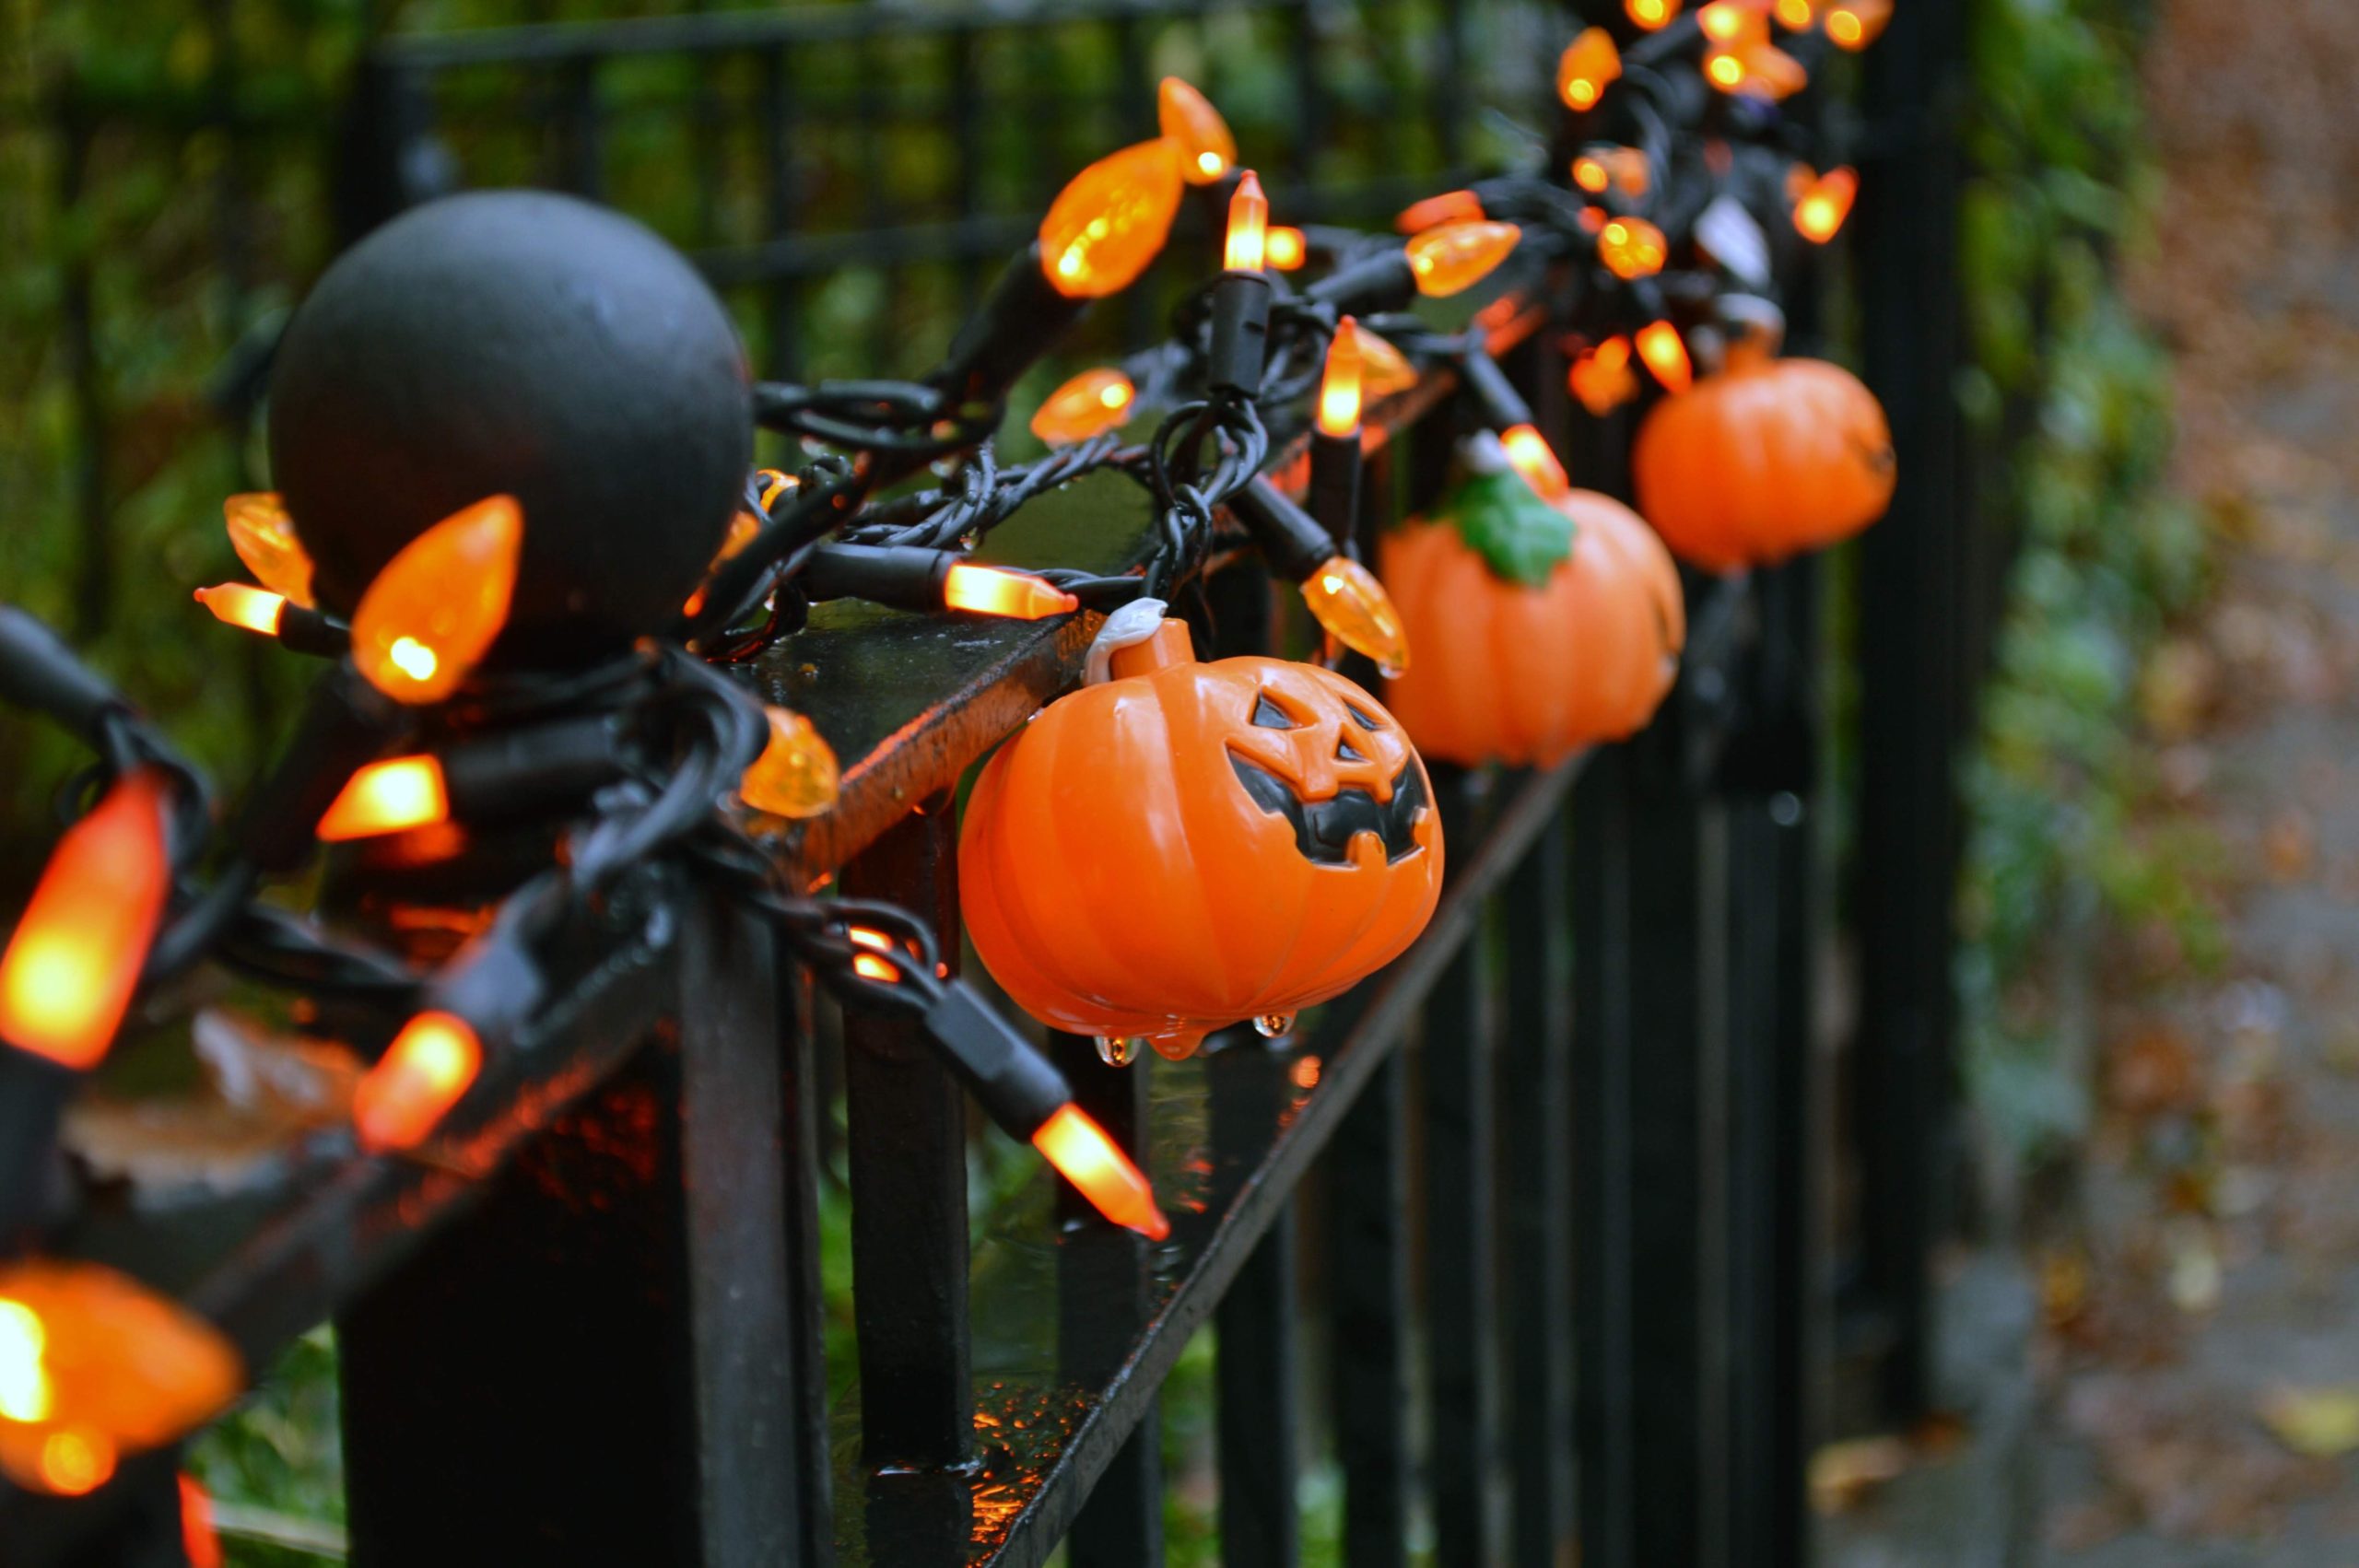 A chain of orange lights and plastic jack-o'-lanterns have been strung up against a black fence.